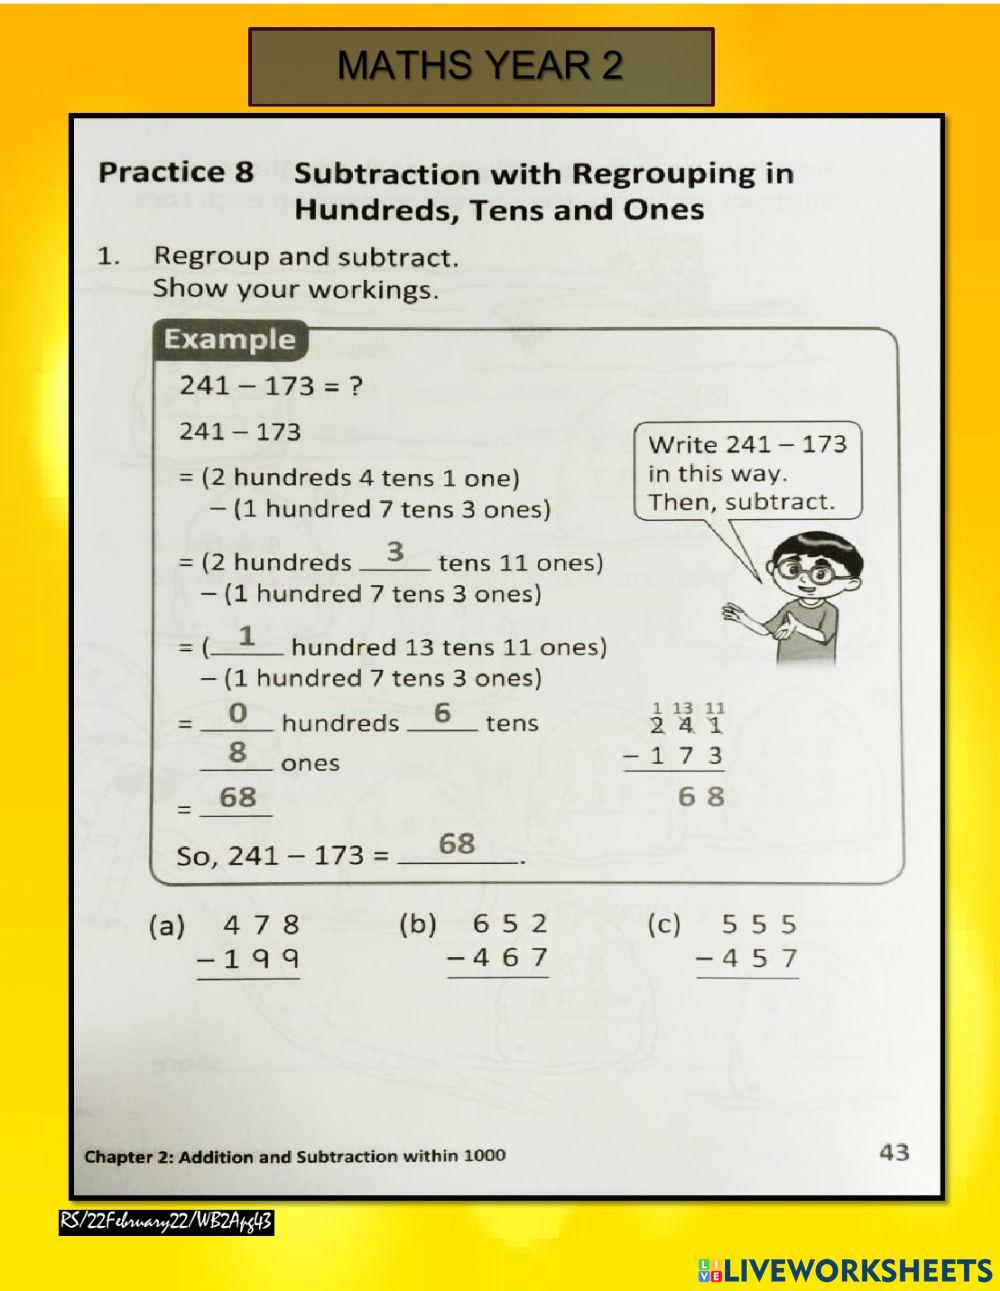 Subtraction with regrouping WBpg 43&44